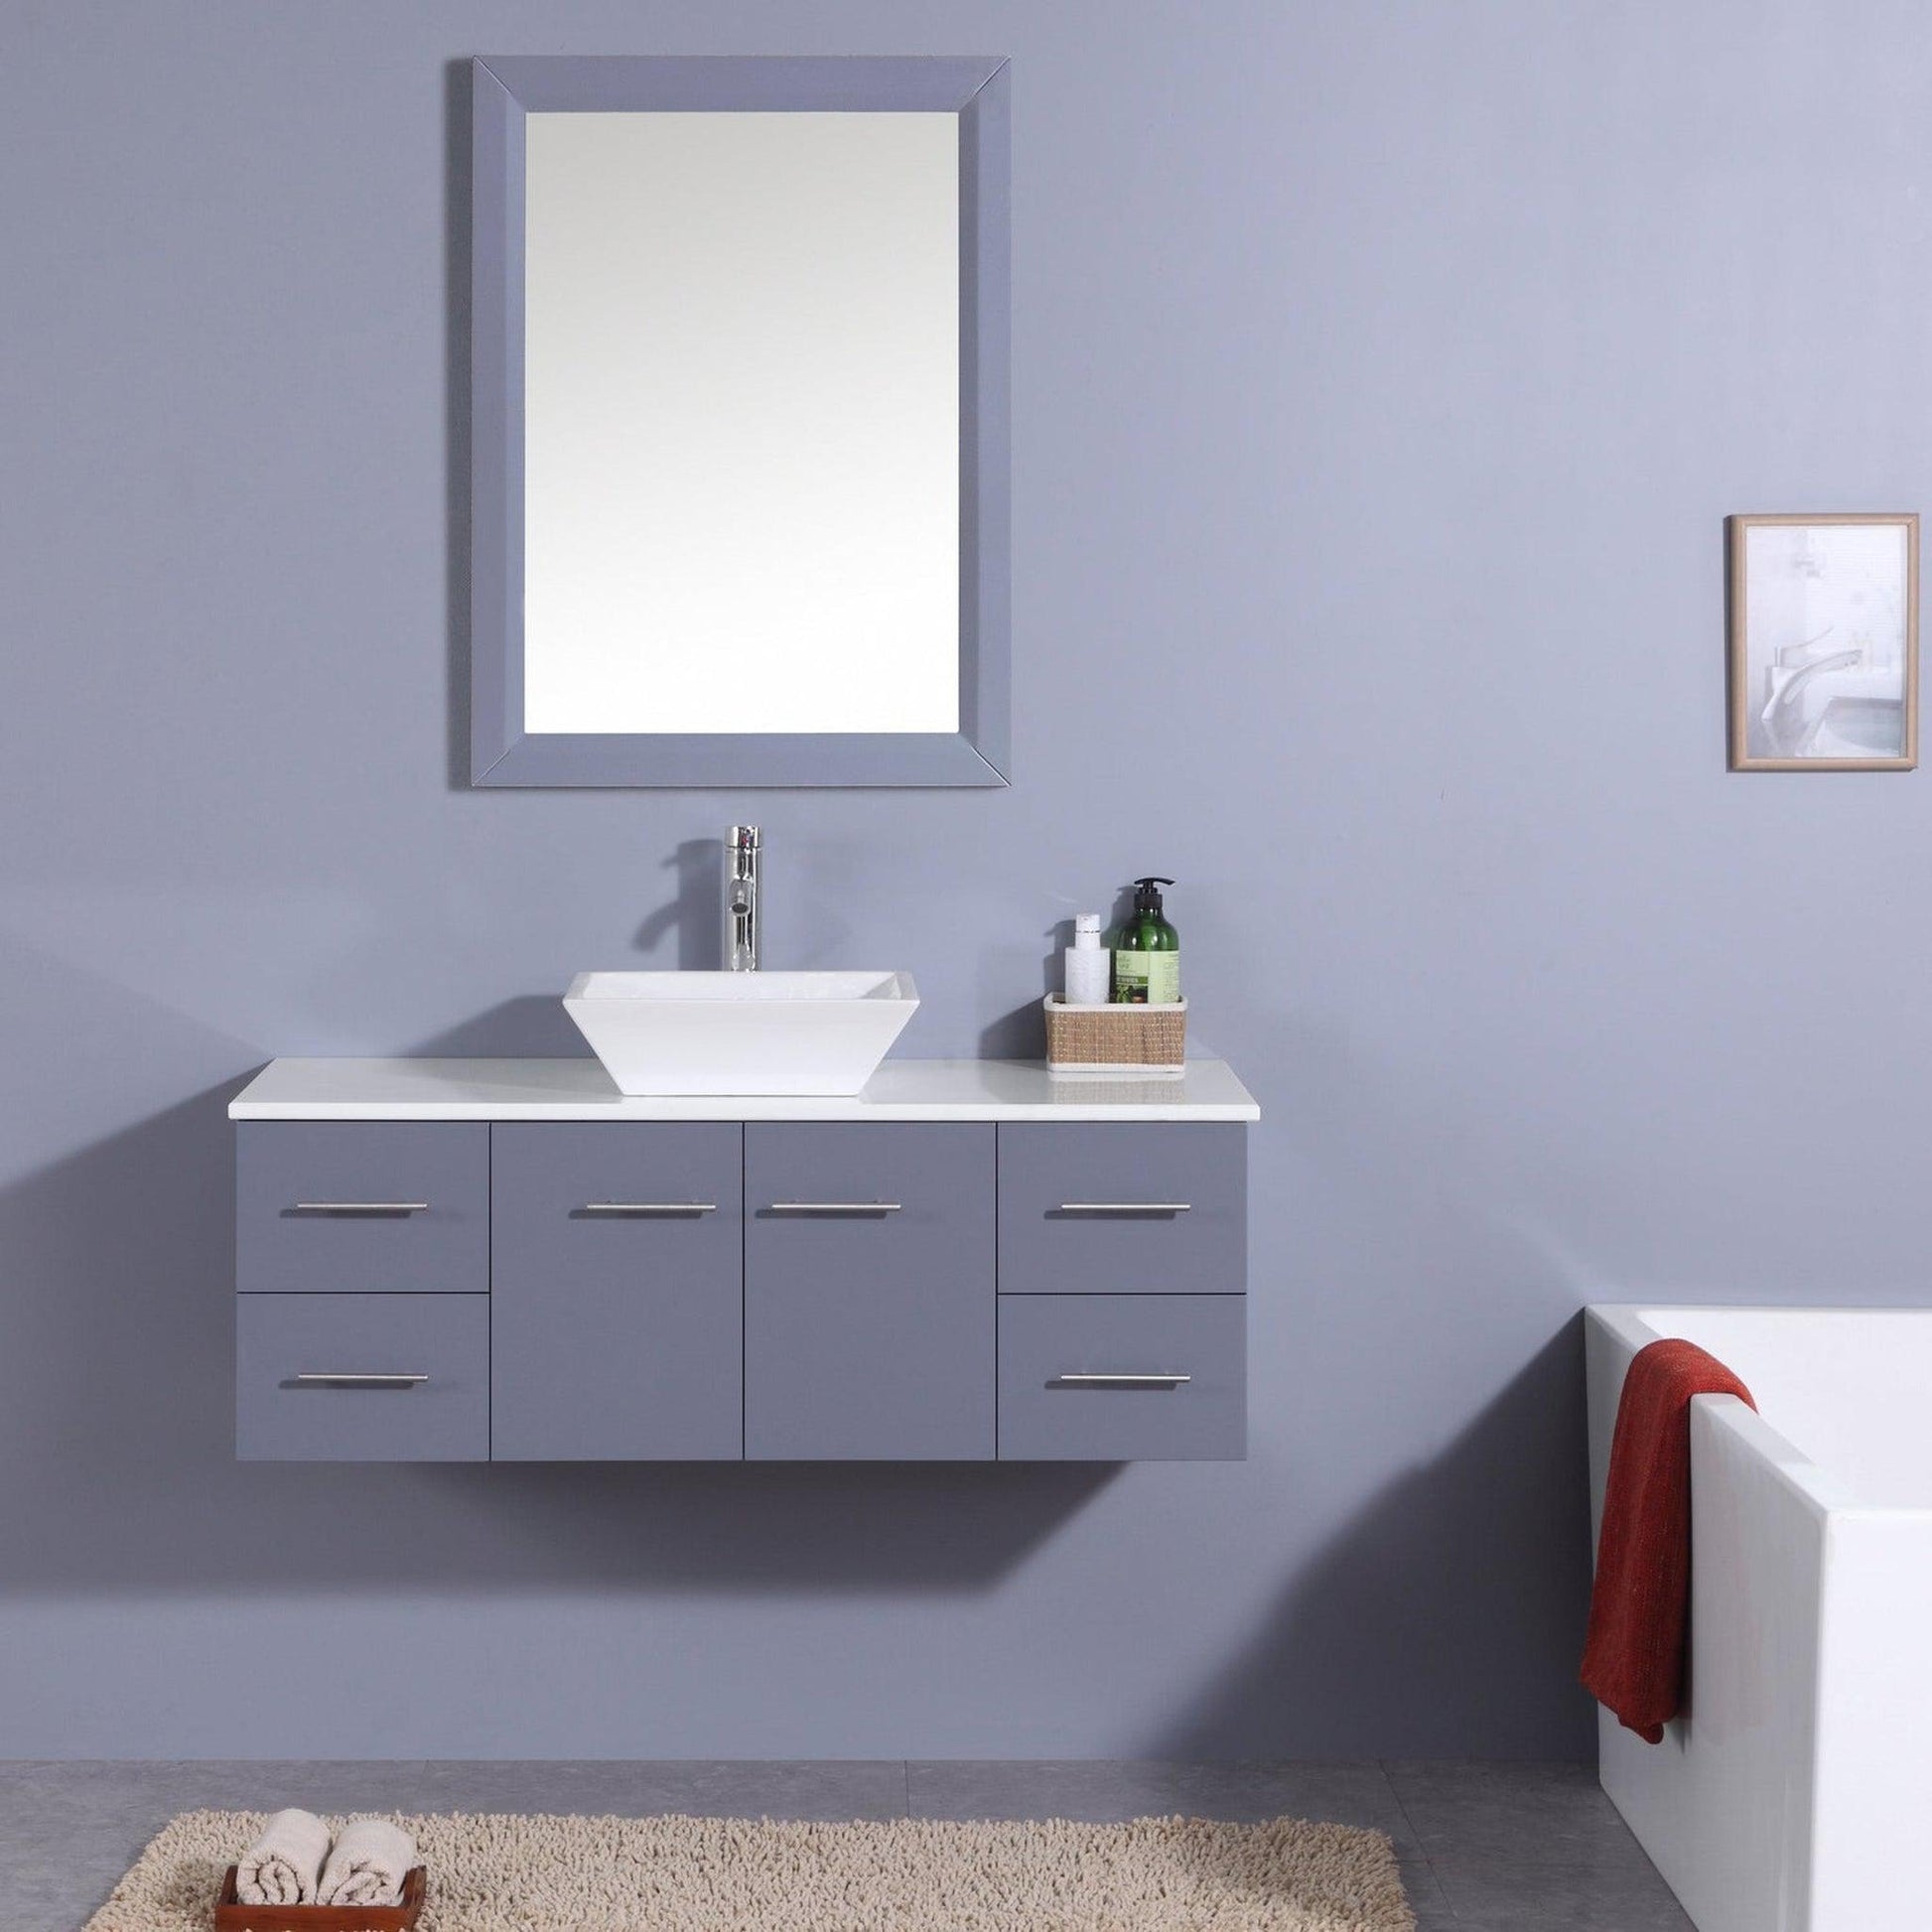 Eviva Totti Wave 48" x 16" Gray Wall-Mounted Bathroom Vanity With White Man-Made Stone Countertop and Single Porcelain Sink